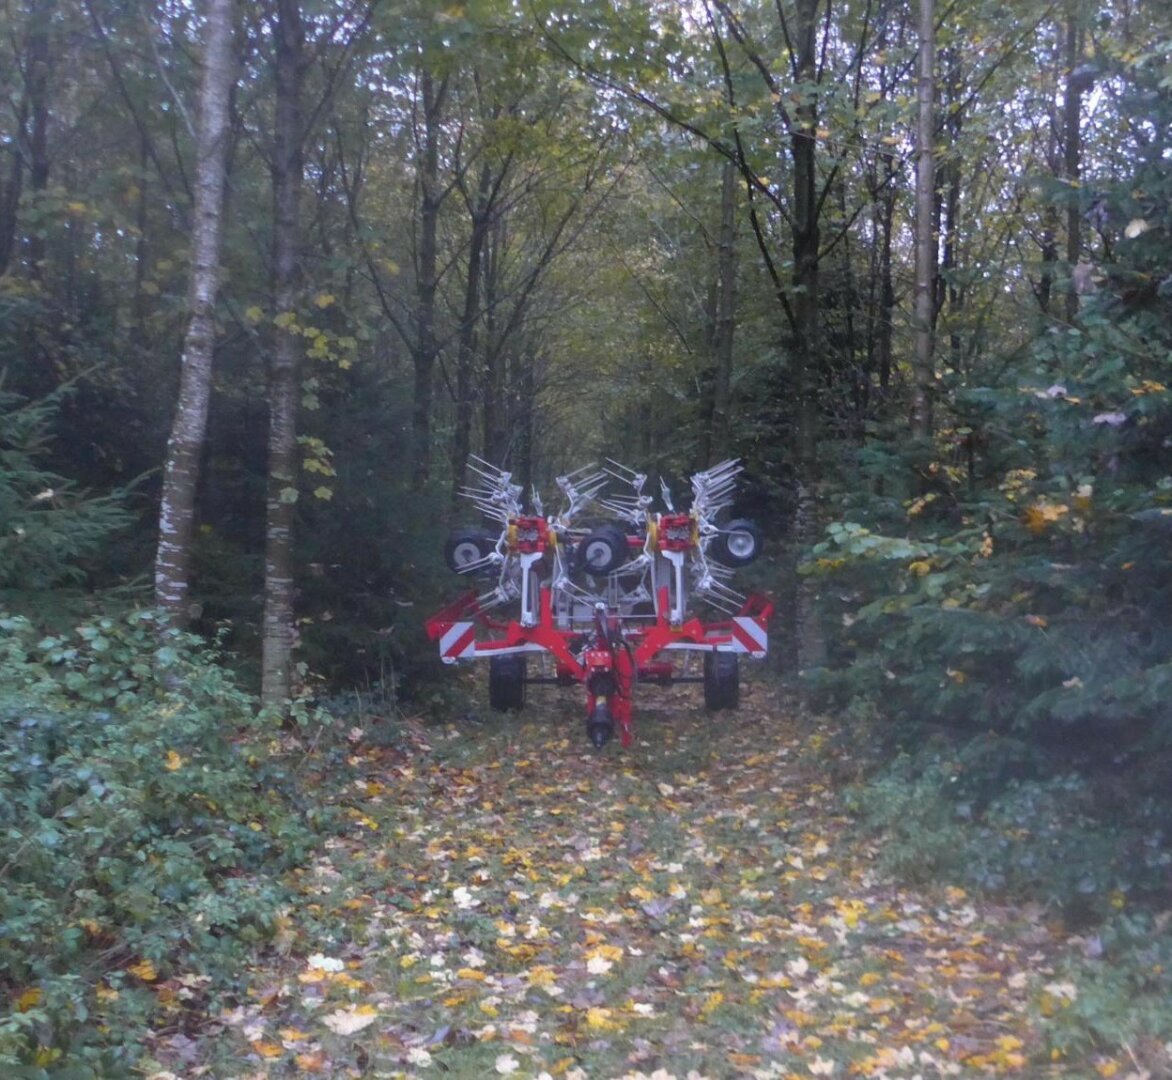 an image or two from my Pixelfed, shows a scary looking farm machine in a forest